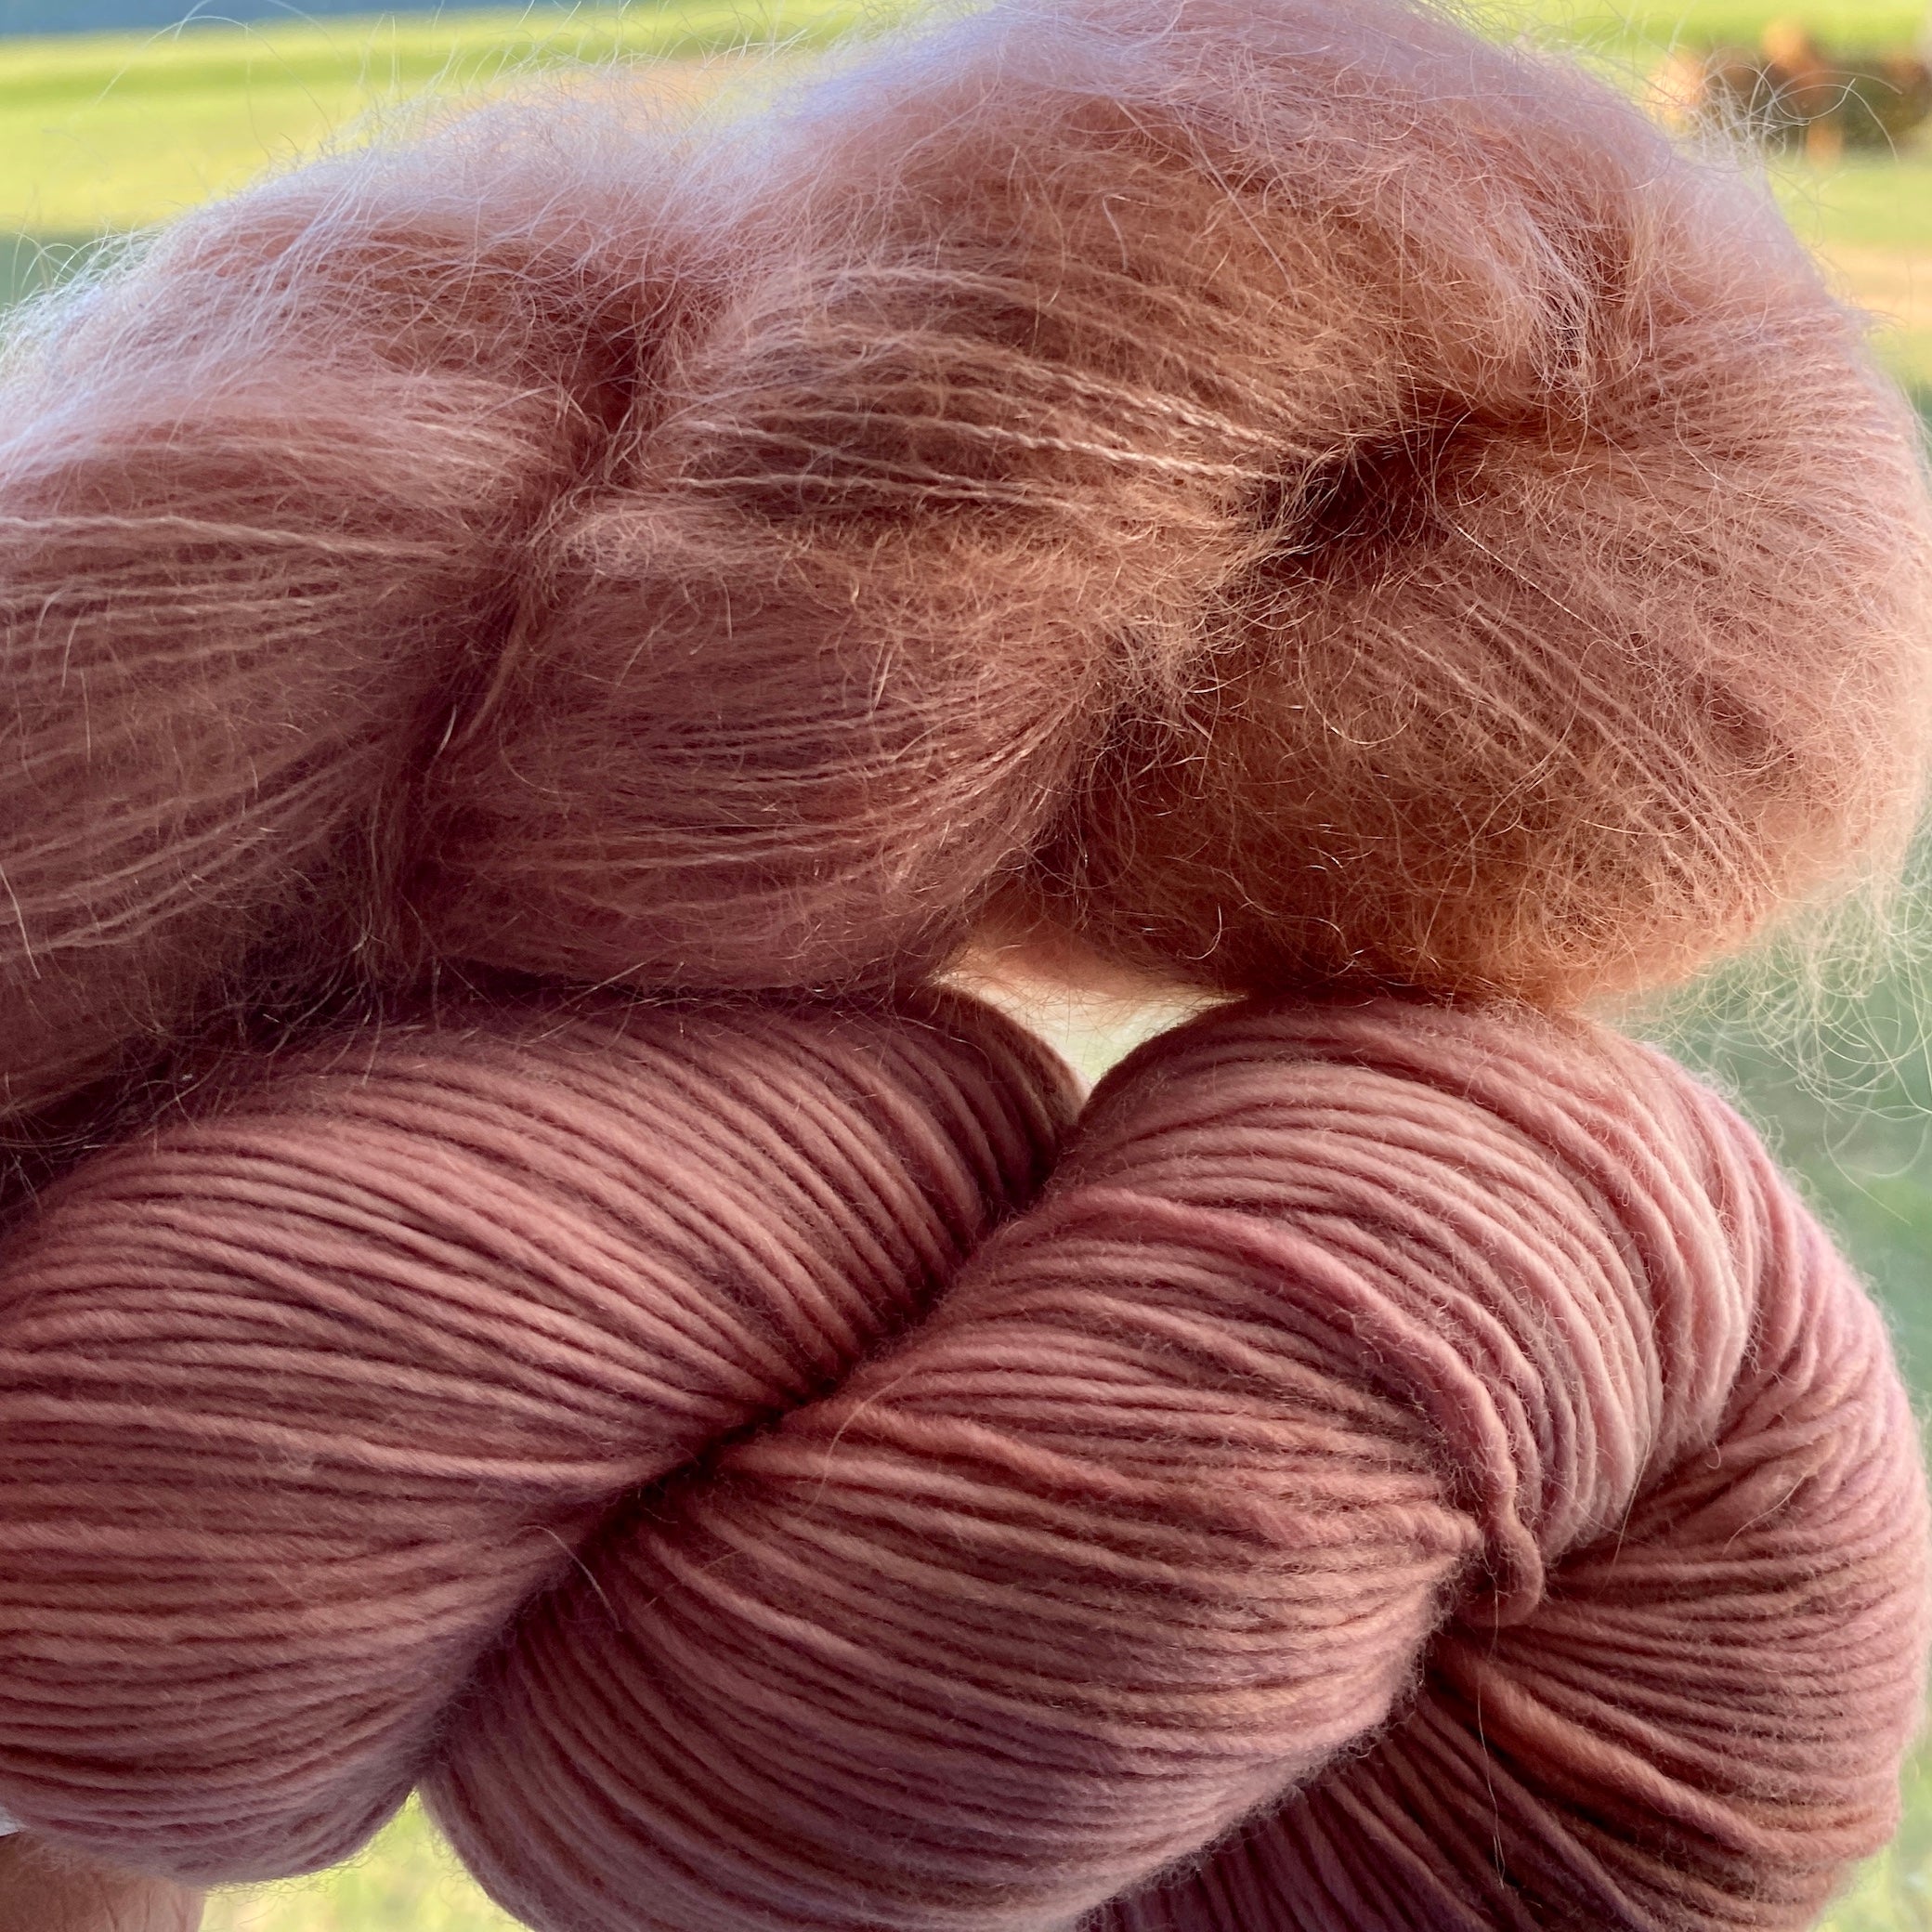 Mulberry Silk Yarn | Lace Weight 6 Ply 1 Skein (100 Grams)